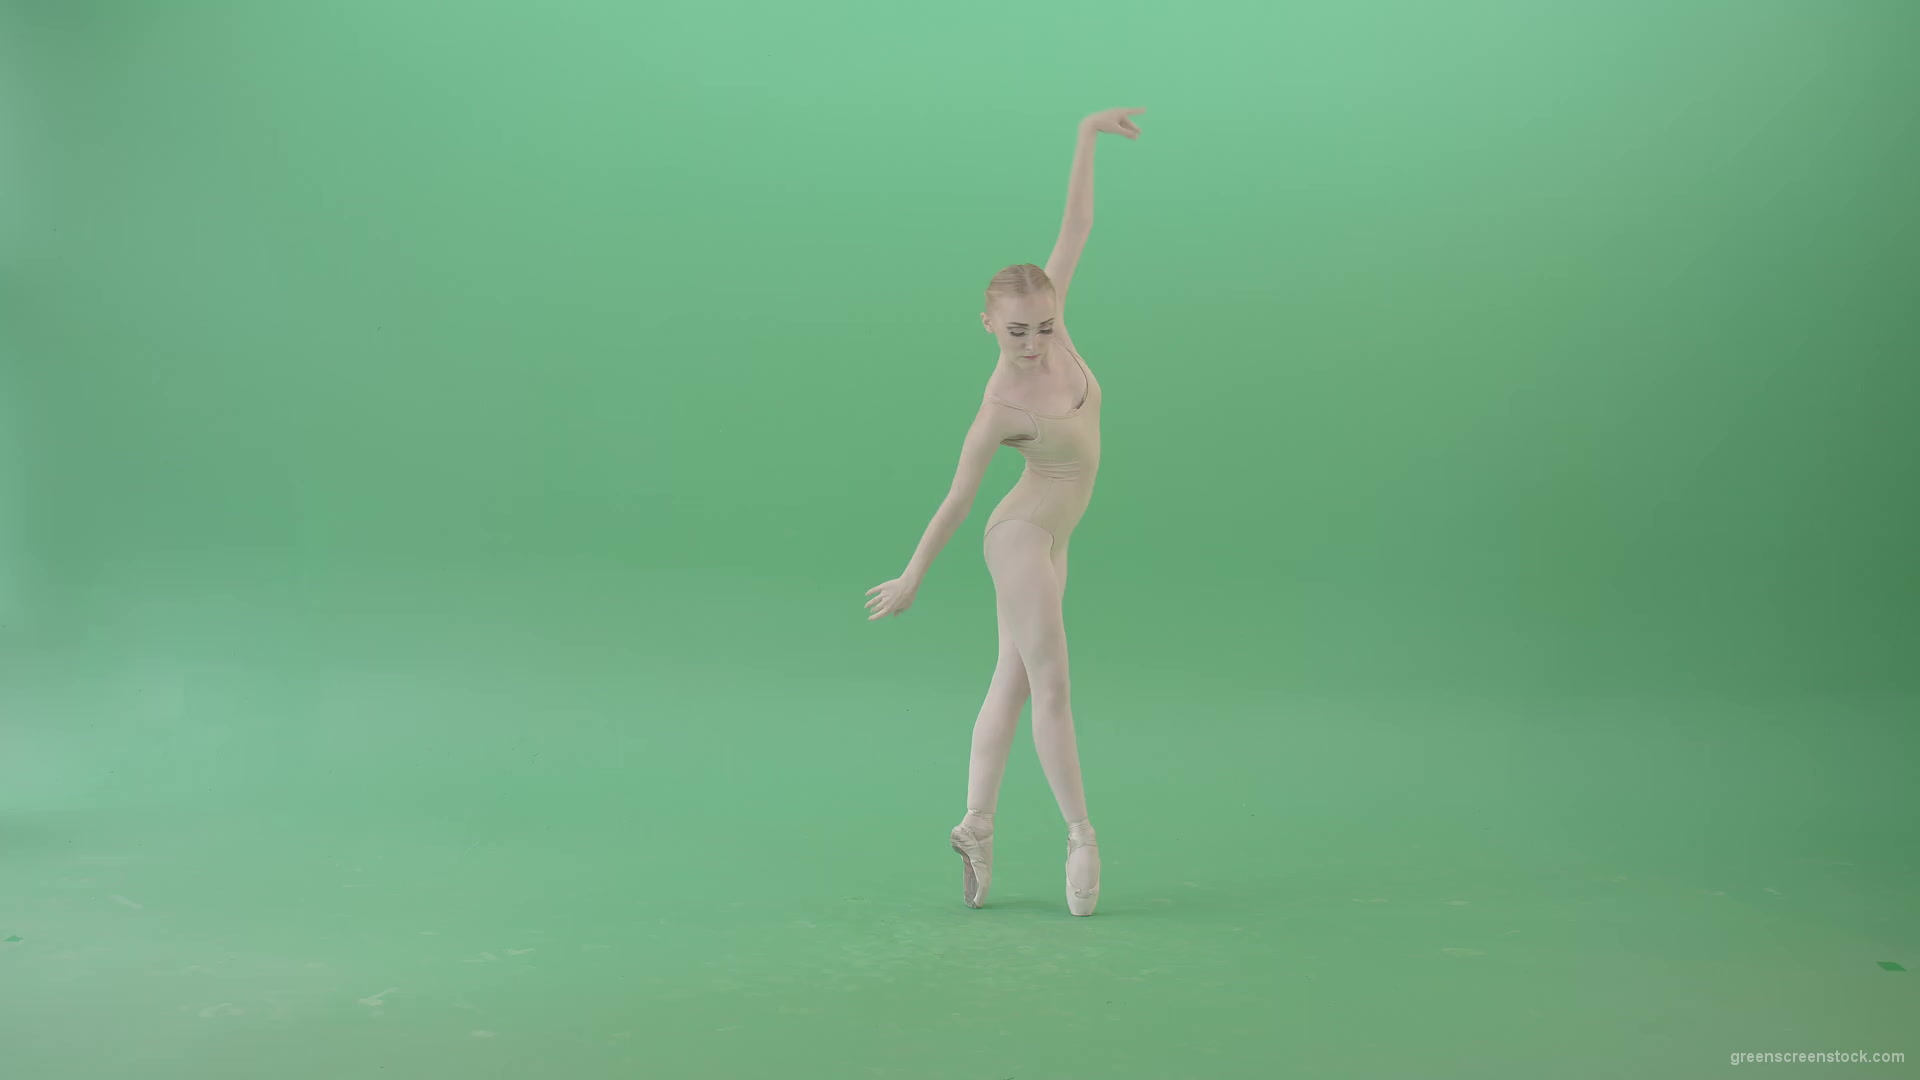 Classical-Ballet-Art-dancing-girl-in-body-skin-wear-chill-in-practice-isolated-on-green-screen-4K-Video-Footage-1920_004 Green Screen Stock